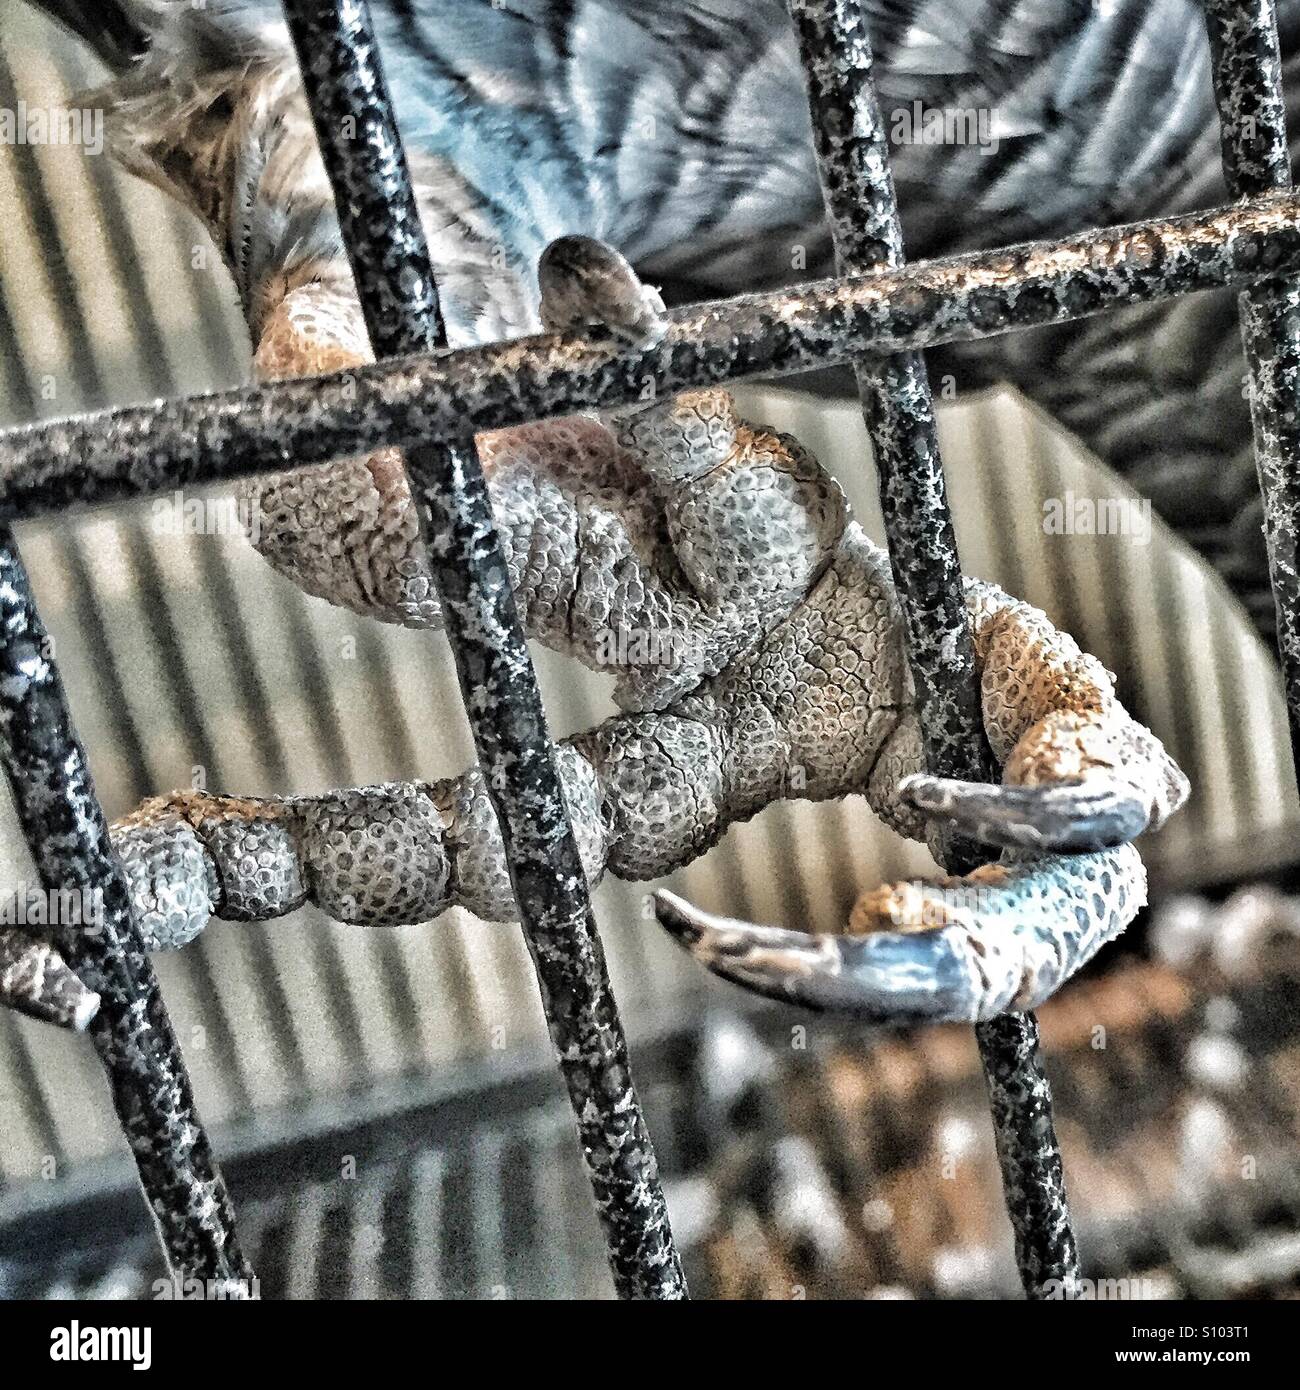 Close up of African grey parrot foot and talons gripping bars of cage Stock Photo